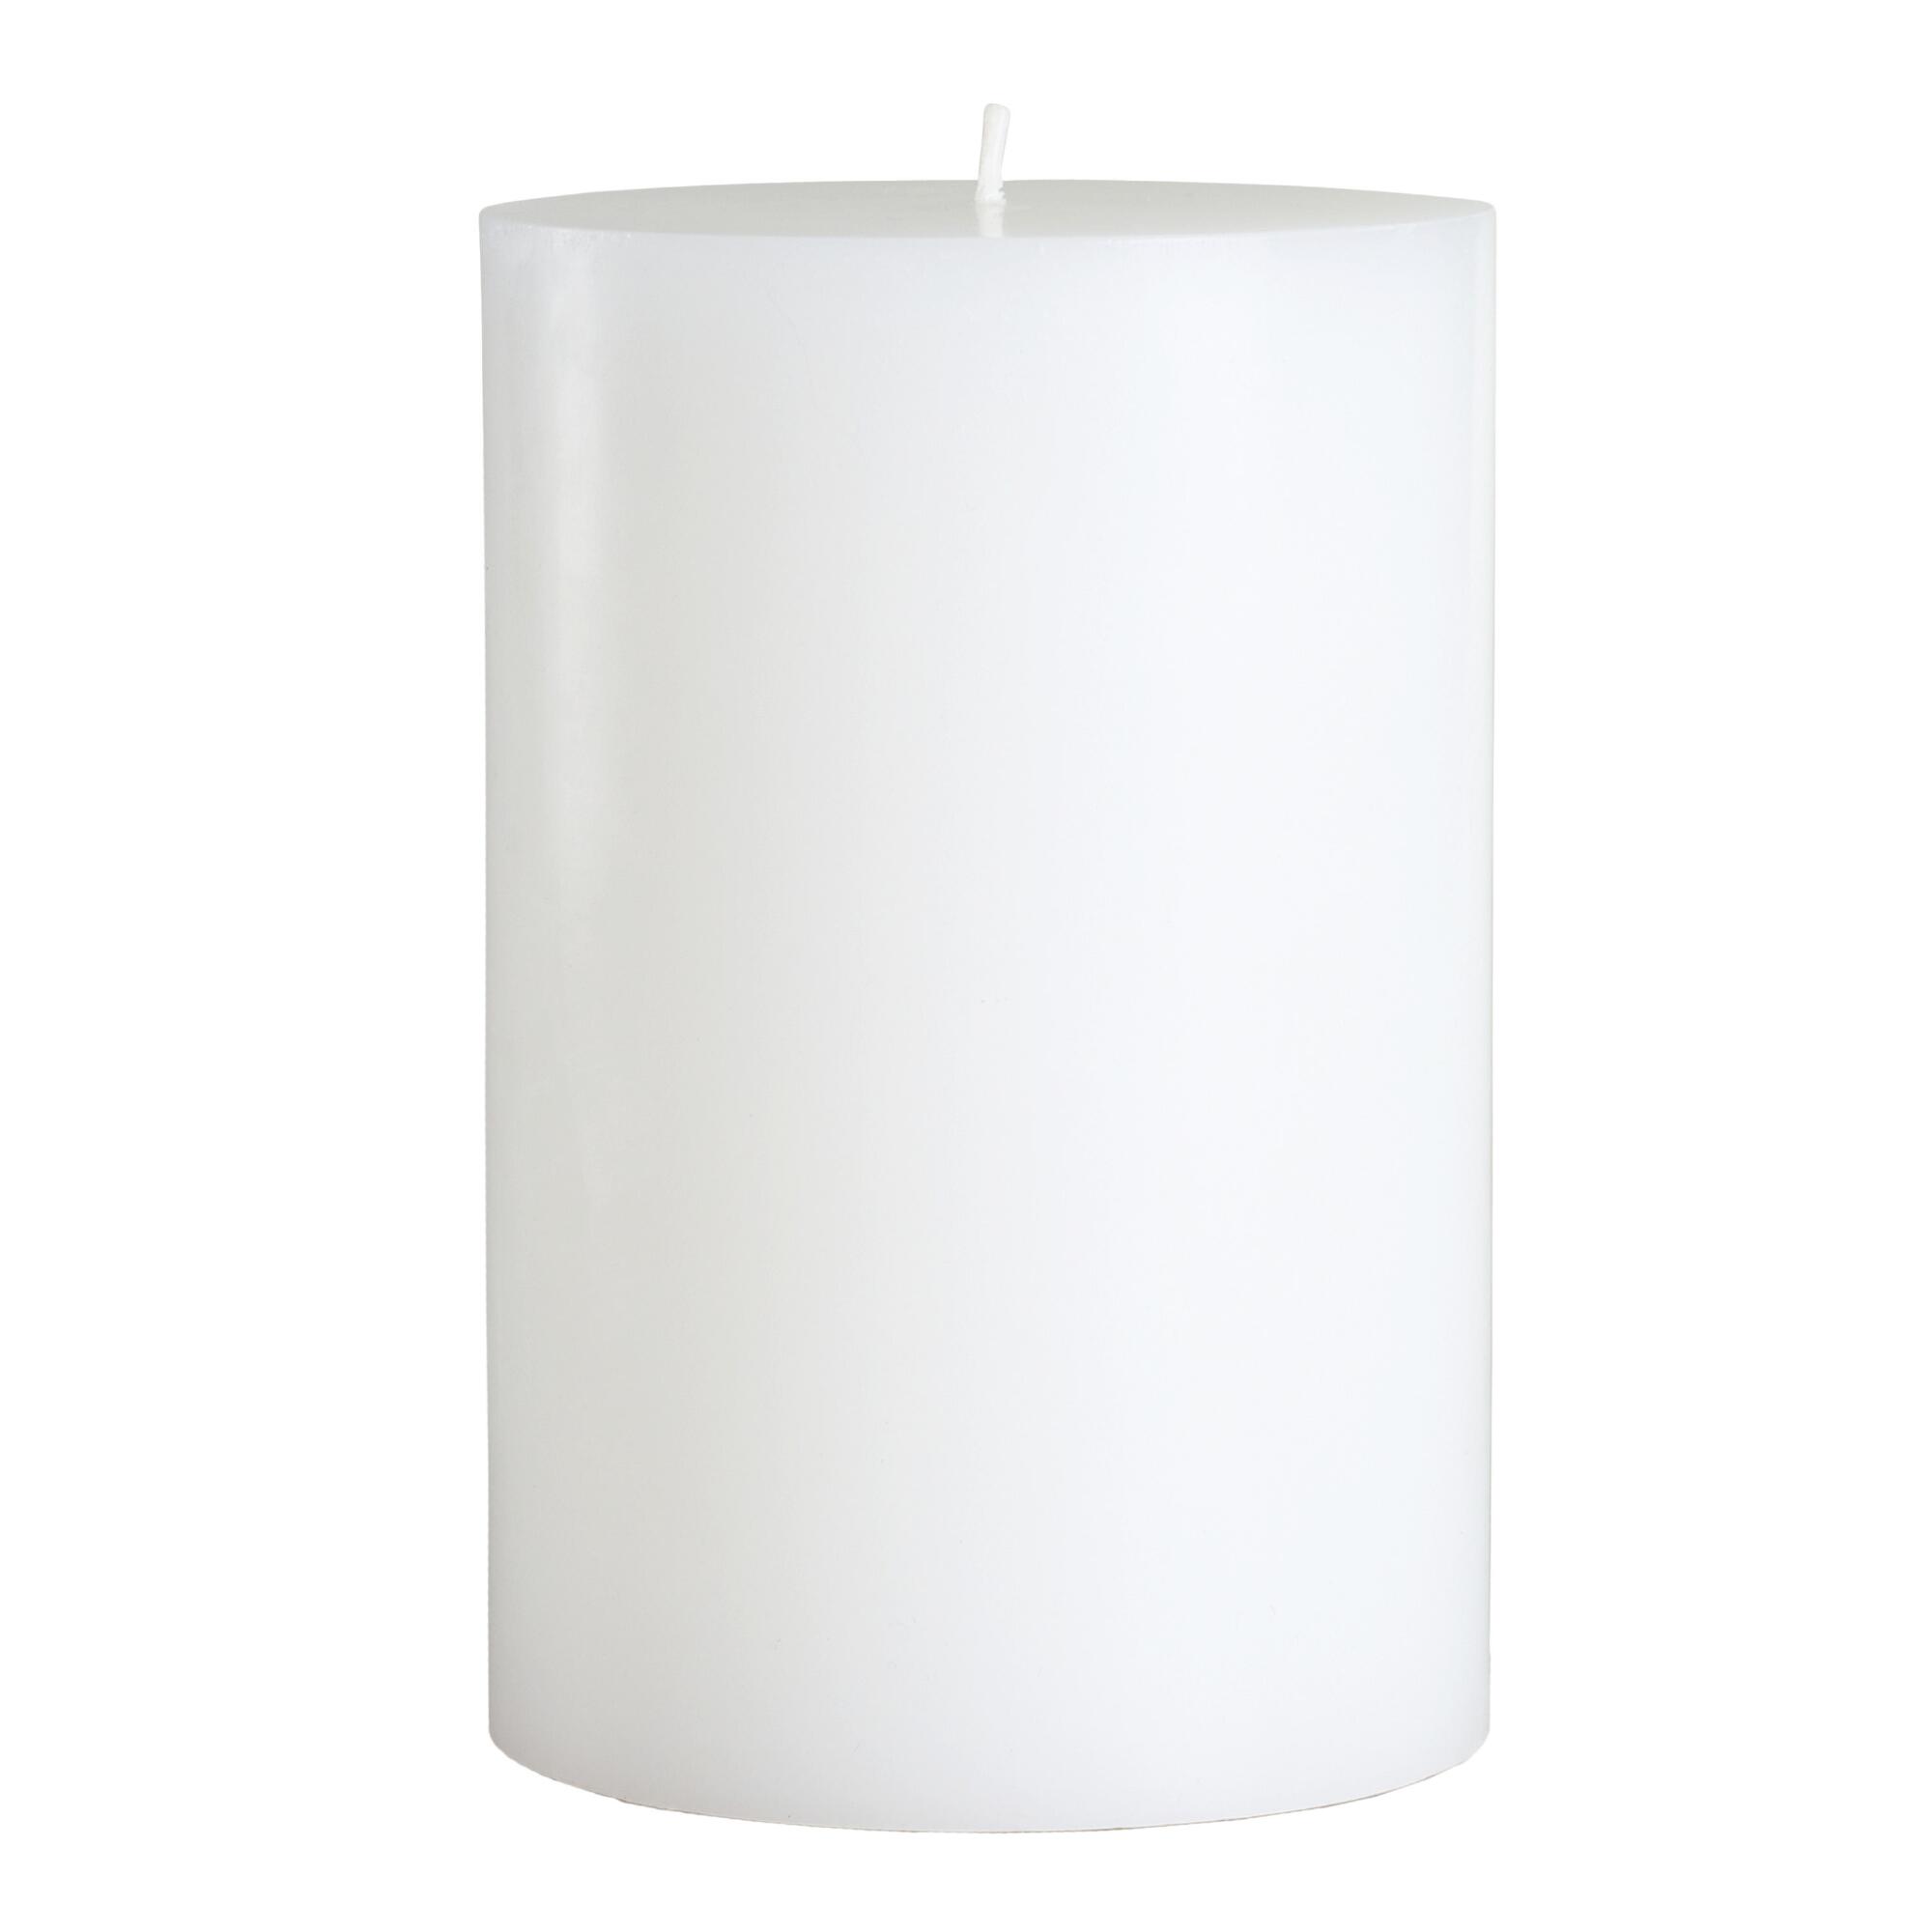 4x6 White Unscented Pillar Candle - Wax by World Market